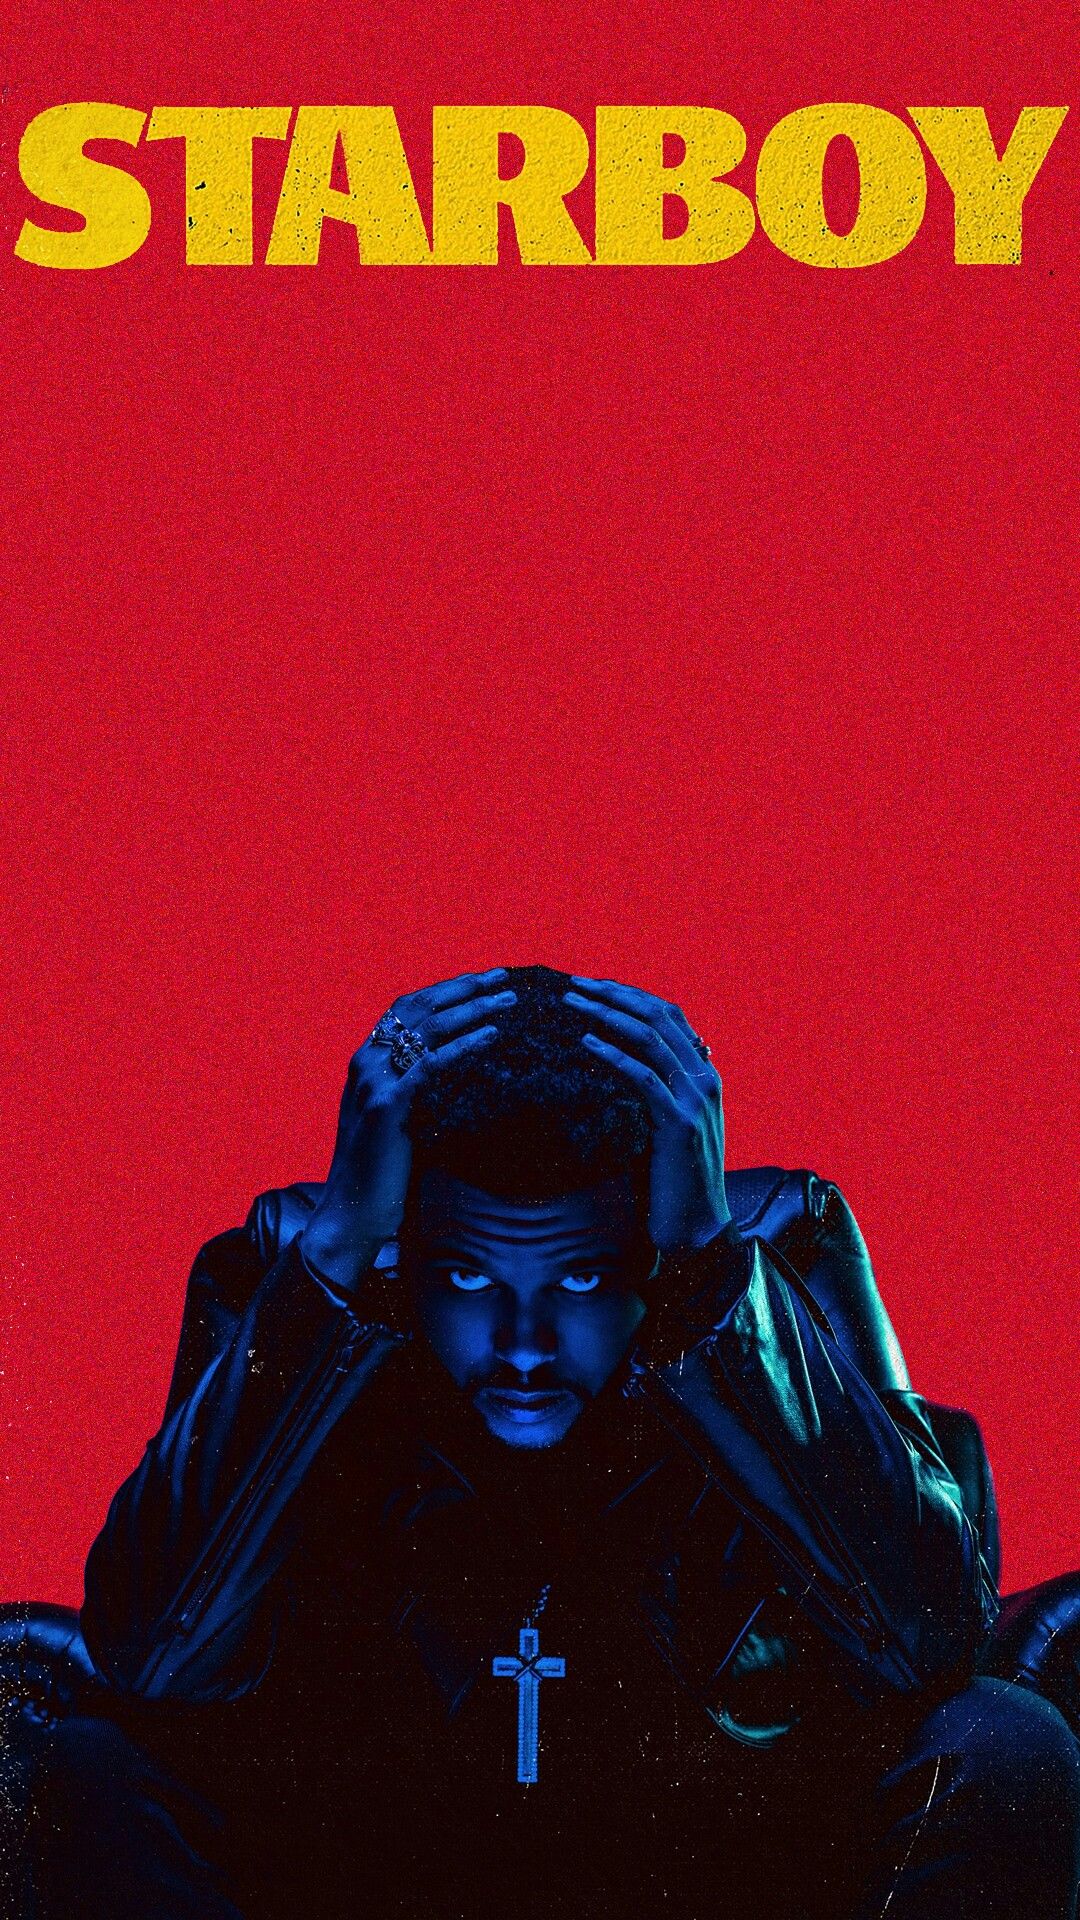 The Weeknd Heartless Wallpapers